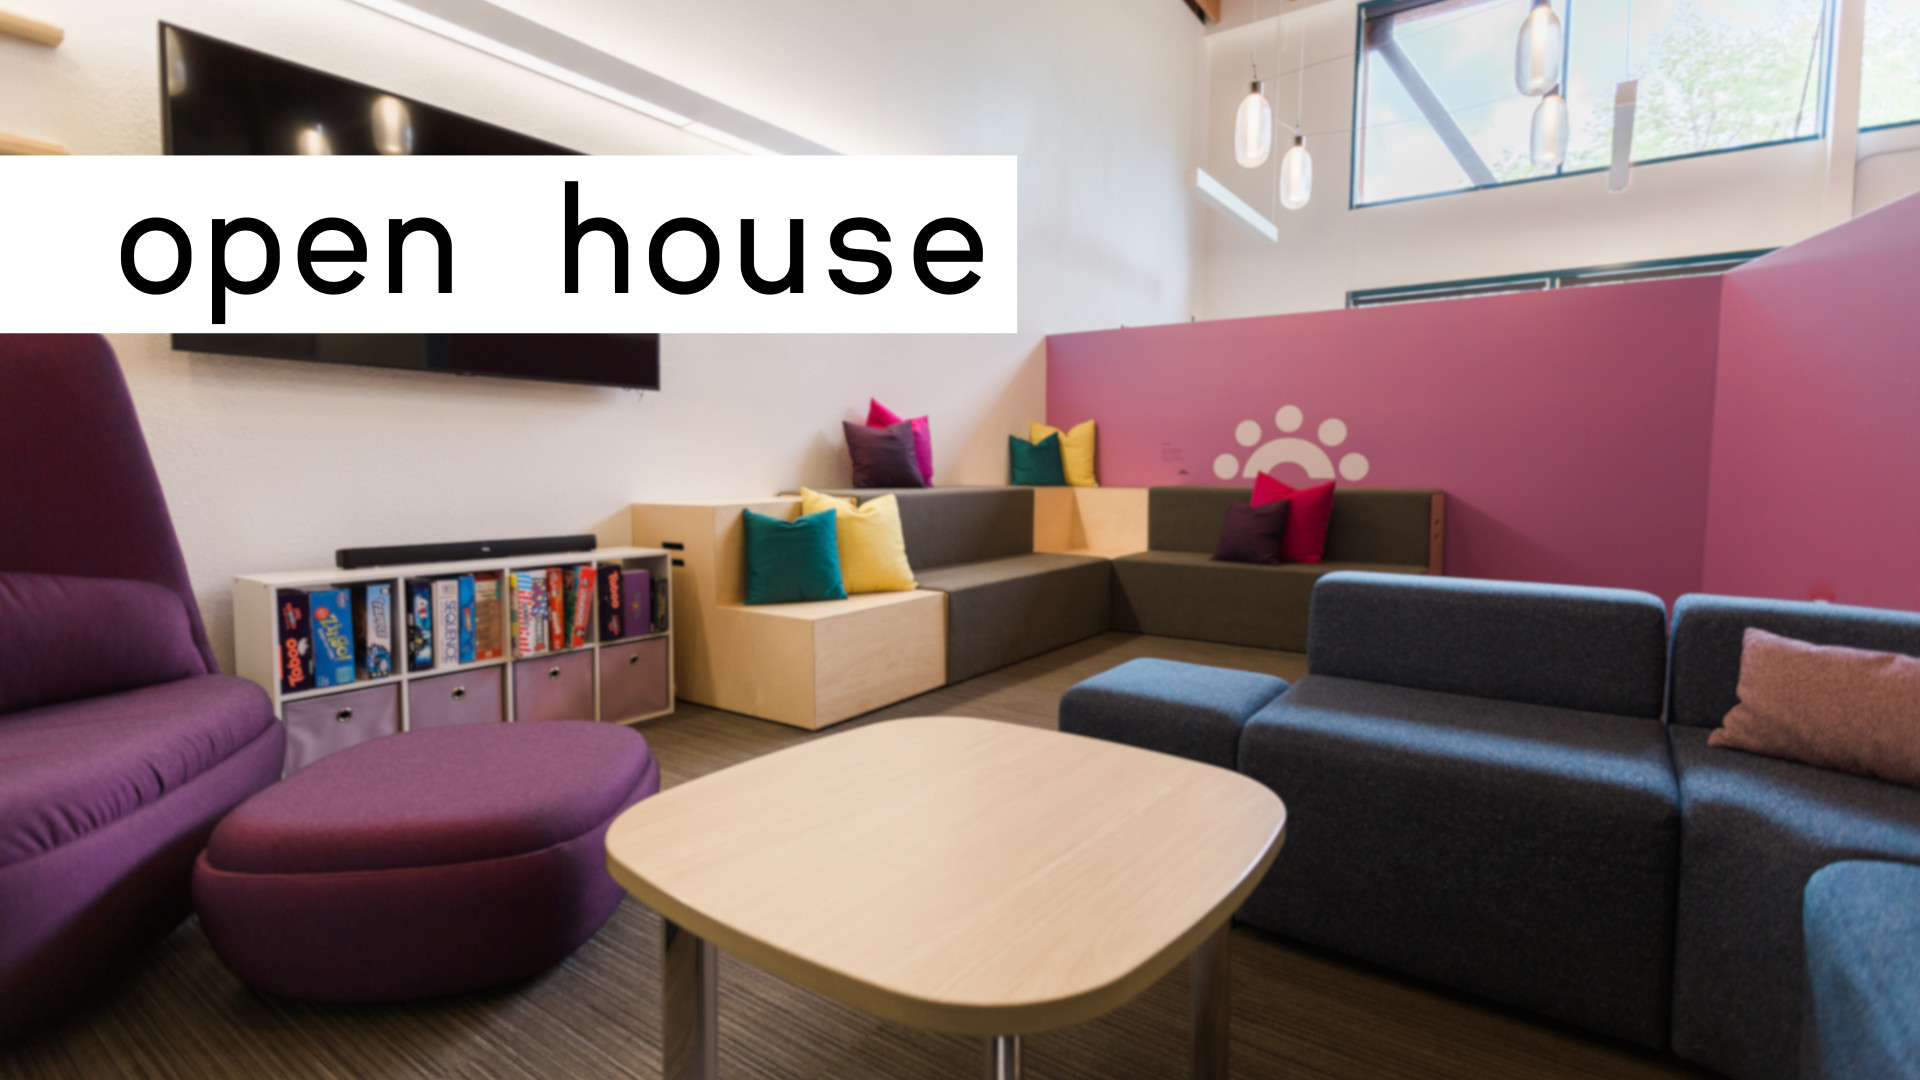 Colorful, open, and airy recreational room with furniture, shelves with board games, and a television, as well as windows. The top left corner of the image includes black text which reads "open house" in front of a white background.